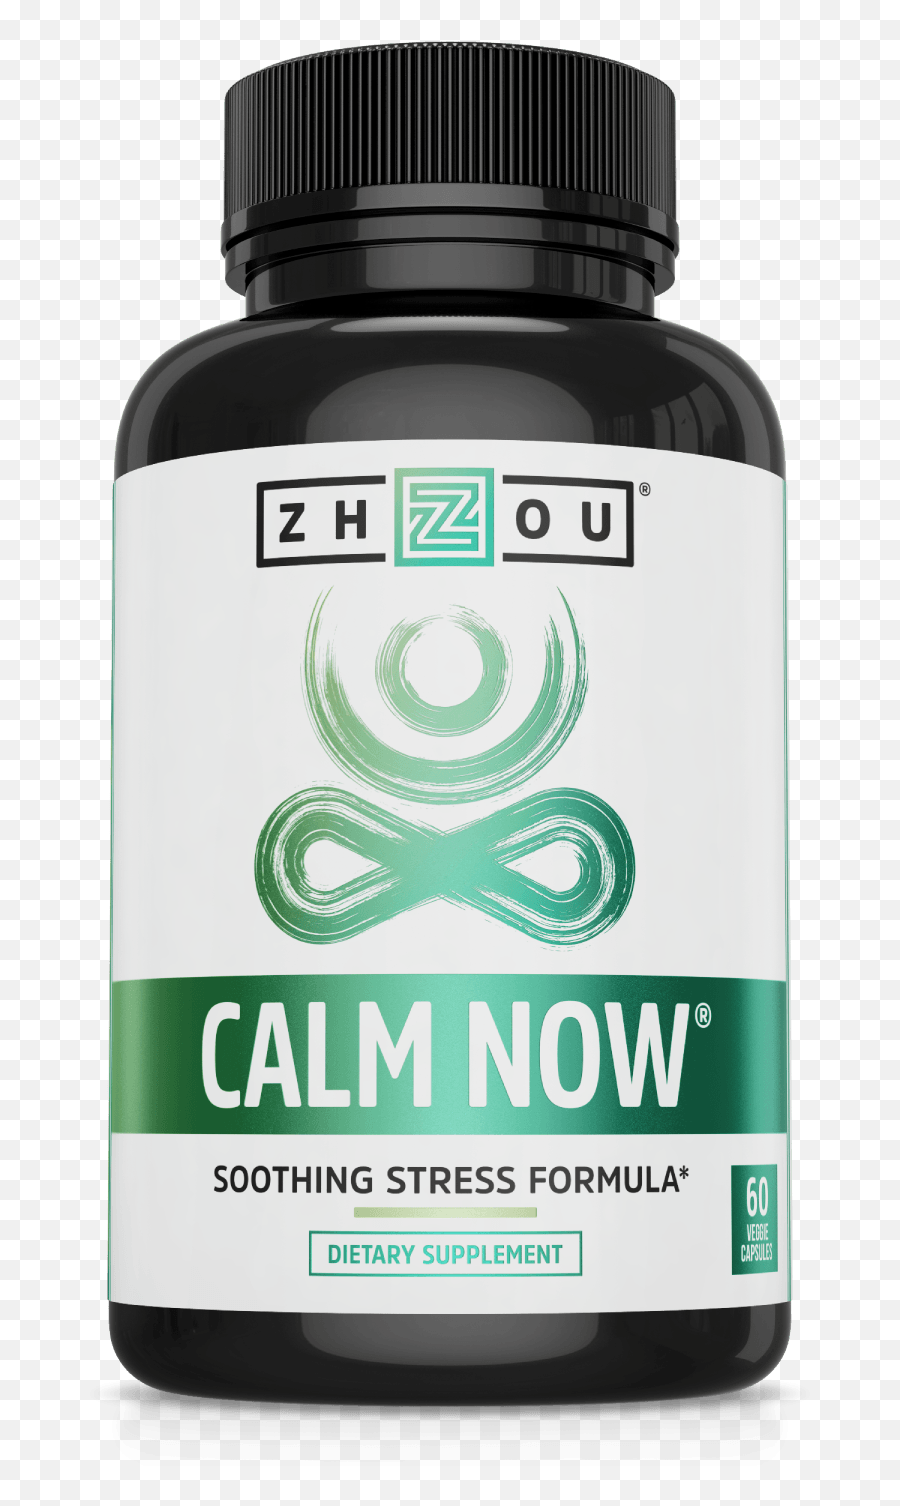 Stress Soothing Formula - Zhou Calm Now Emoji,Rave Of Emotions And Calmnes